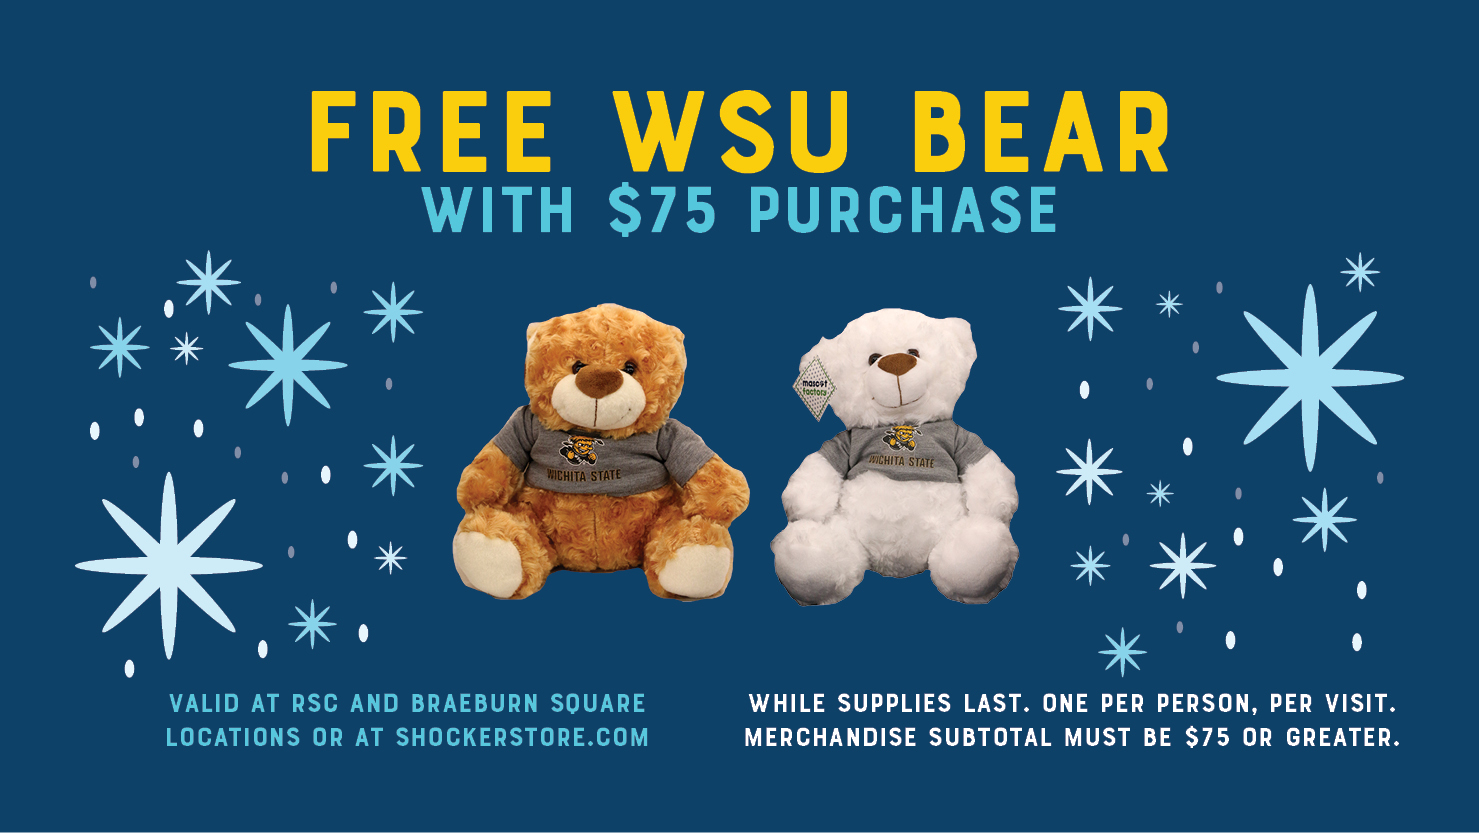 Free WSU bear with  $75 purchase. limit 1  person per visit. While supplies last